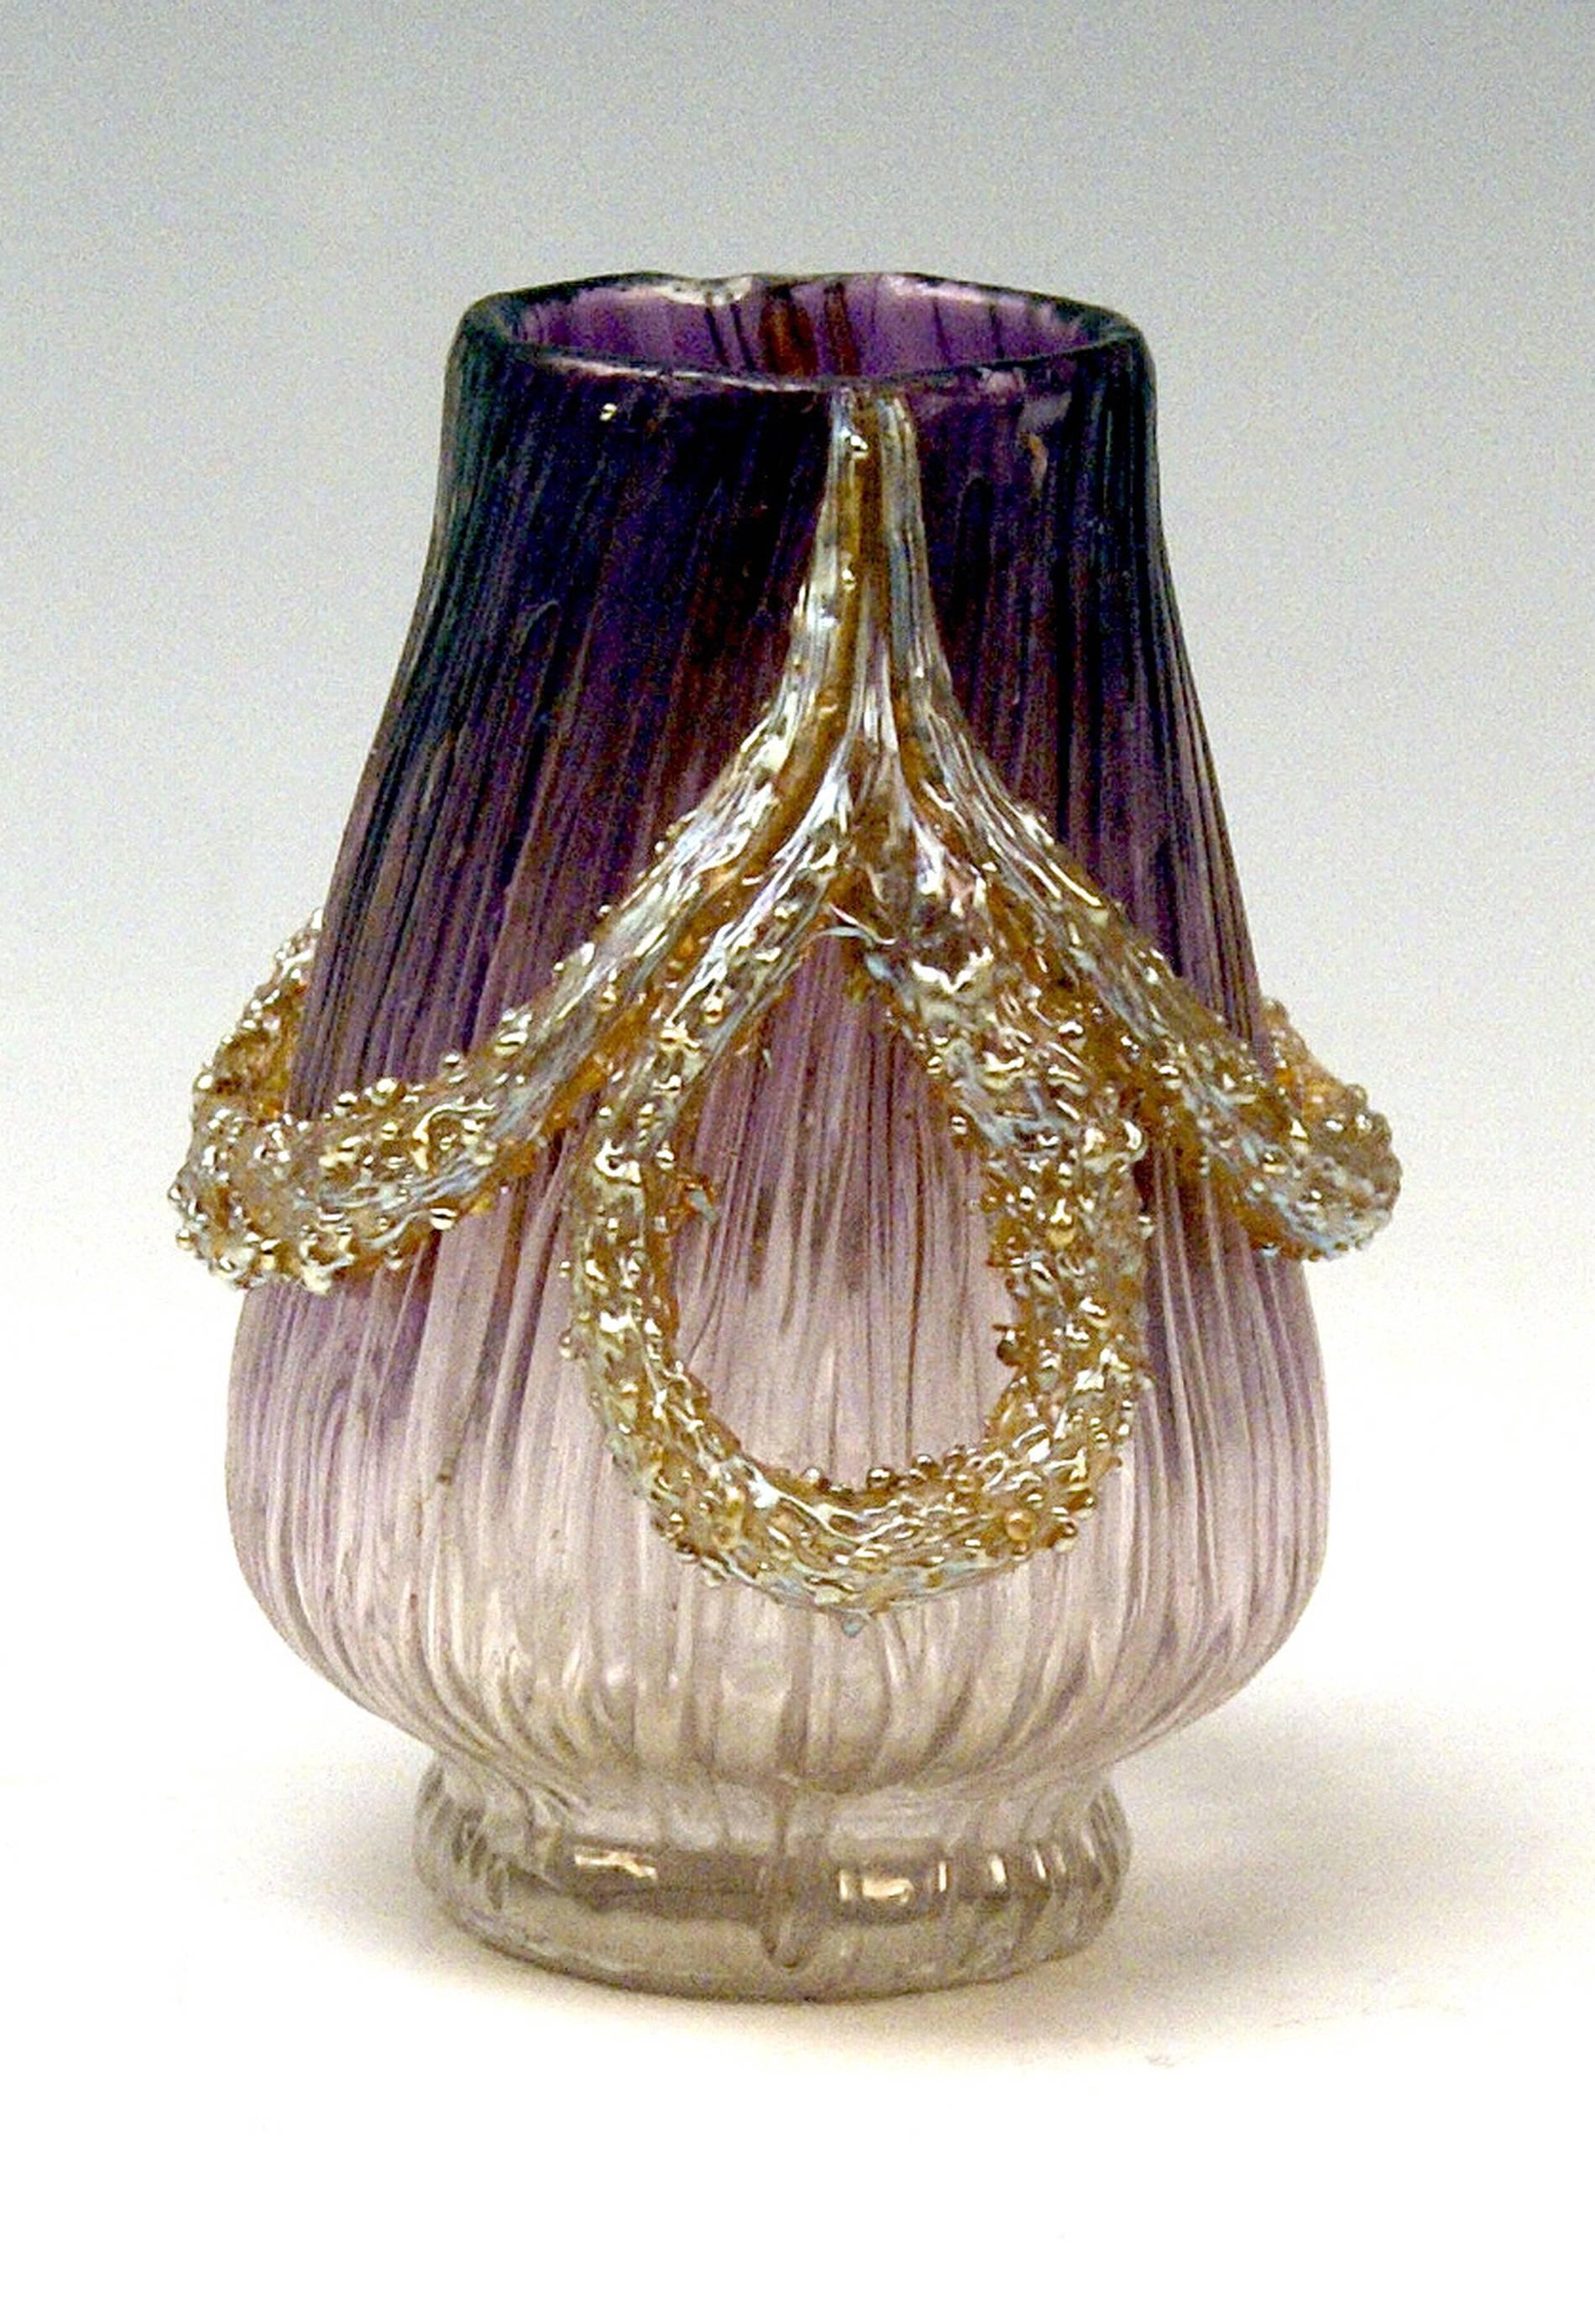 Made by Loetz, Klostermuehle (Bohemia / Old Imperial Austria) / circa 1900
Decor: Texas (= milky glass, merging into violet shades at top area). 

Detailed description:
Vase Loetz (Lötz) Widow Klostermuehle Bohemia Art Nouveau / decor texas: It